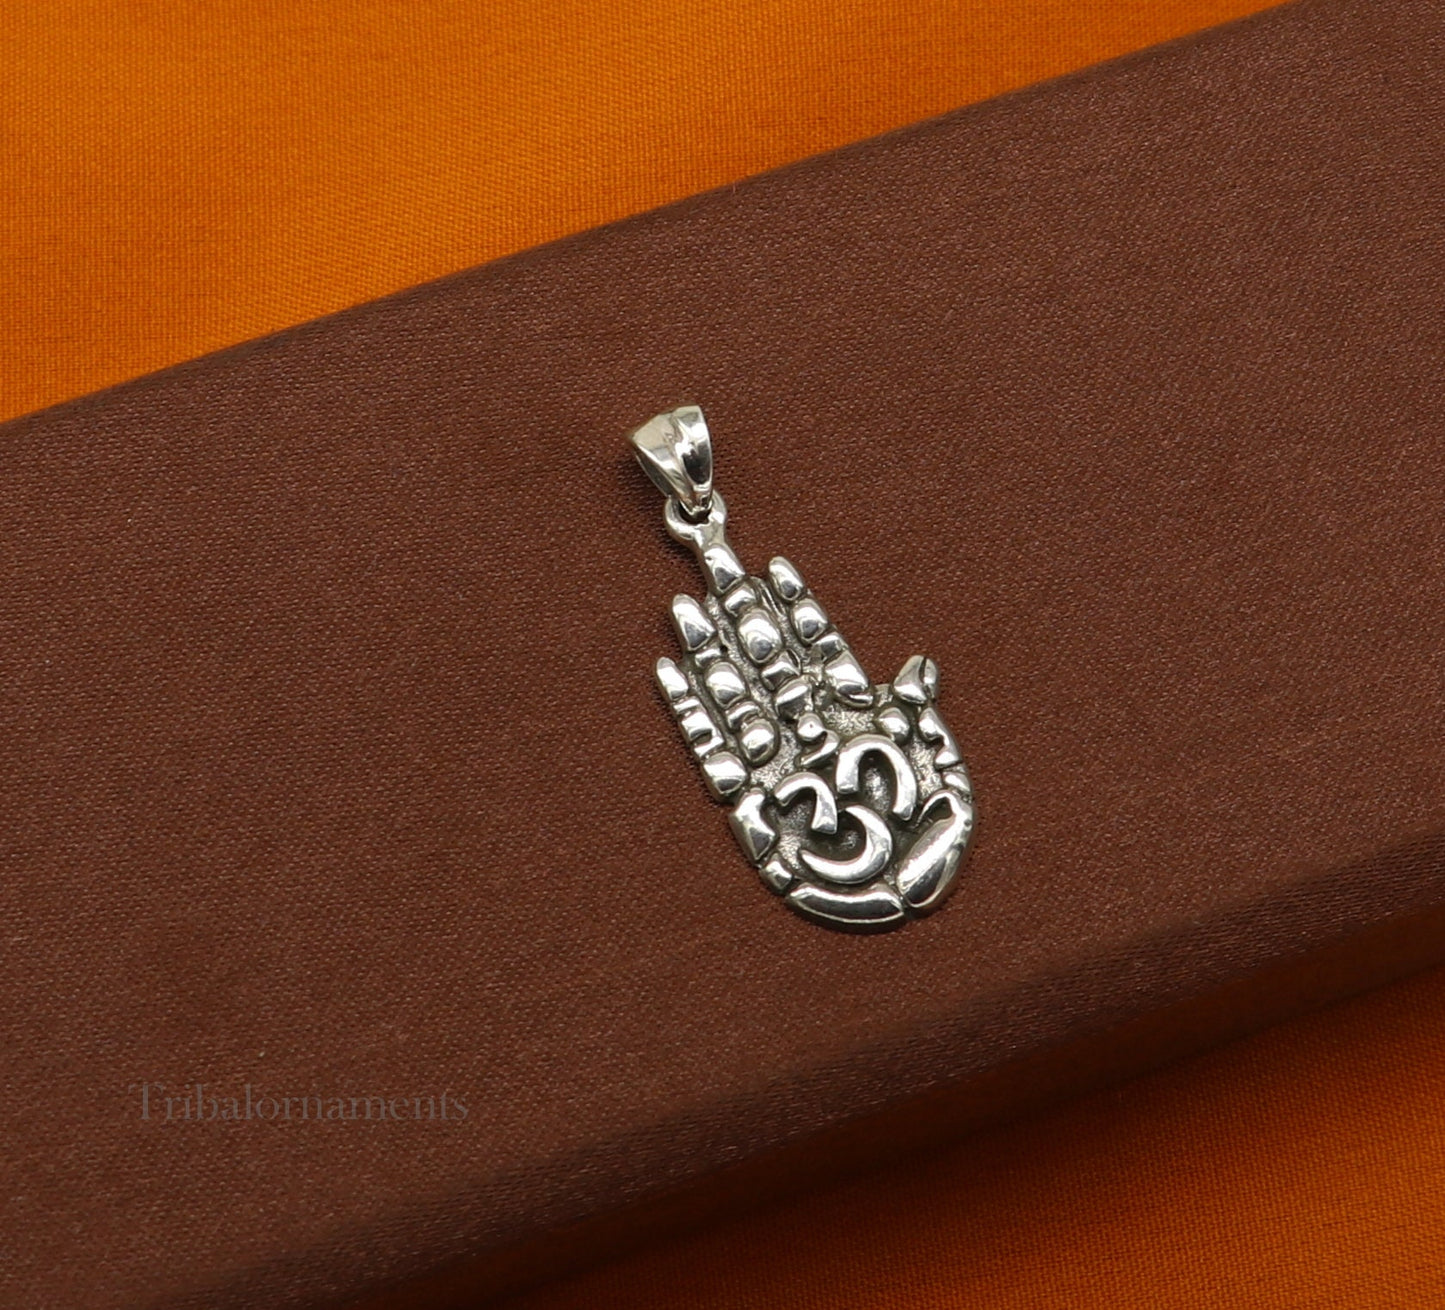 925 sterling silver handmade divine hand palm with 'AUM' excellent unique design pendant, blessing palm pendant from india ssp910 - TRIBAL ORNAMENTS